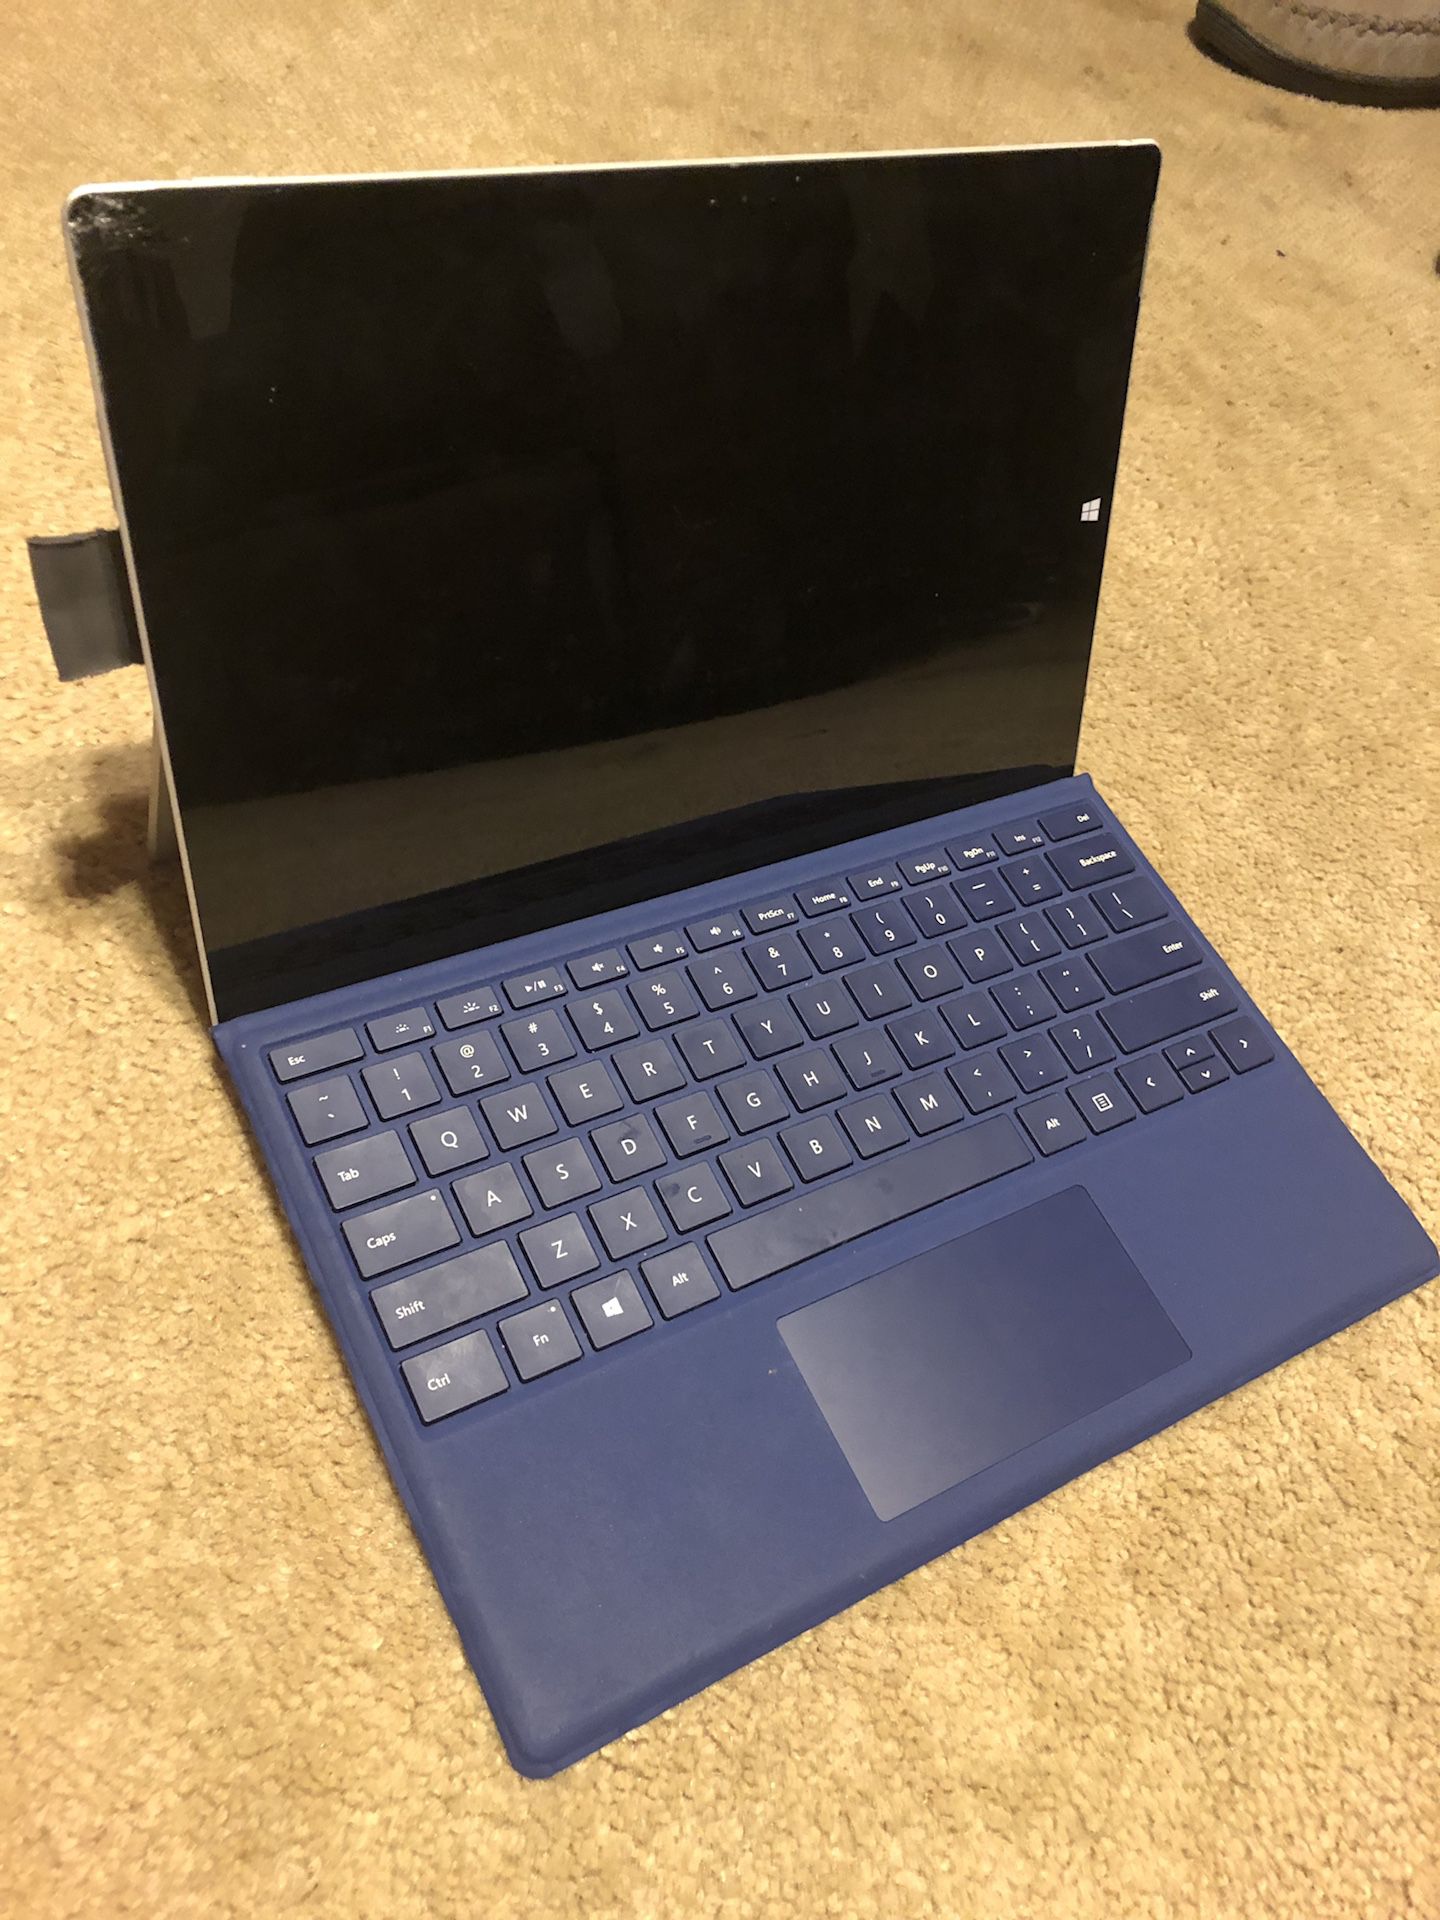 Microsoft Surface Pro 3 (Cracked Screen) + Keyboard, Charger, and Case